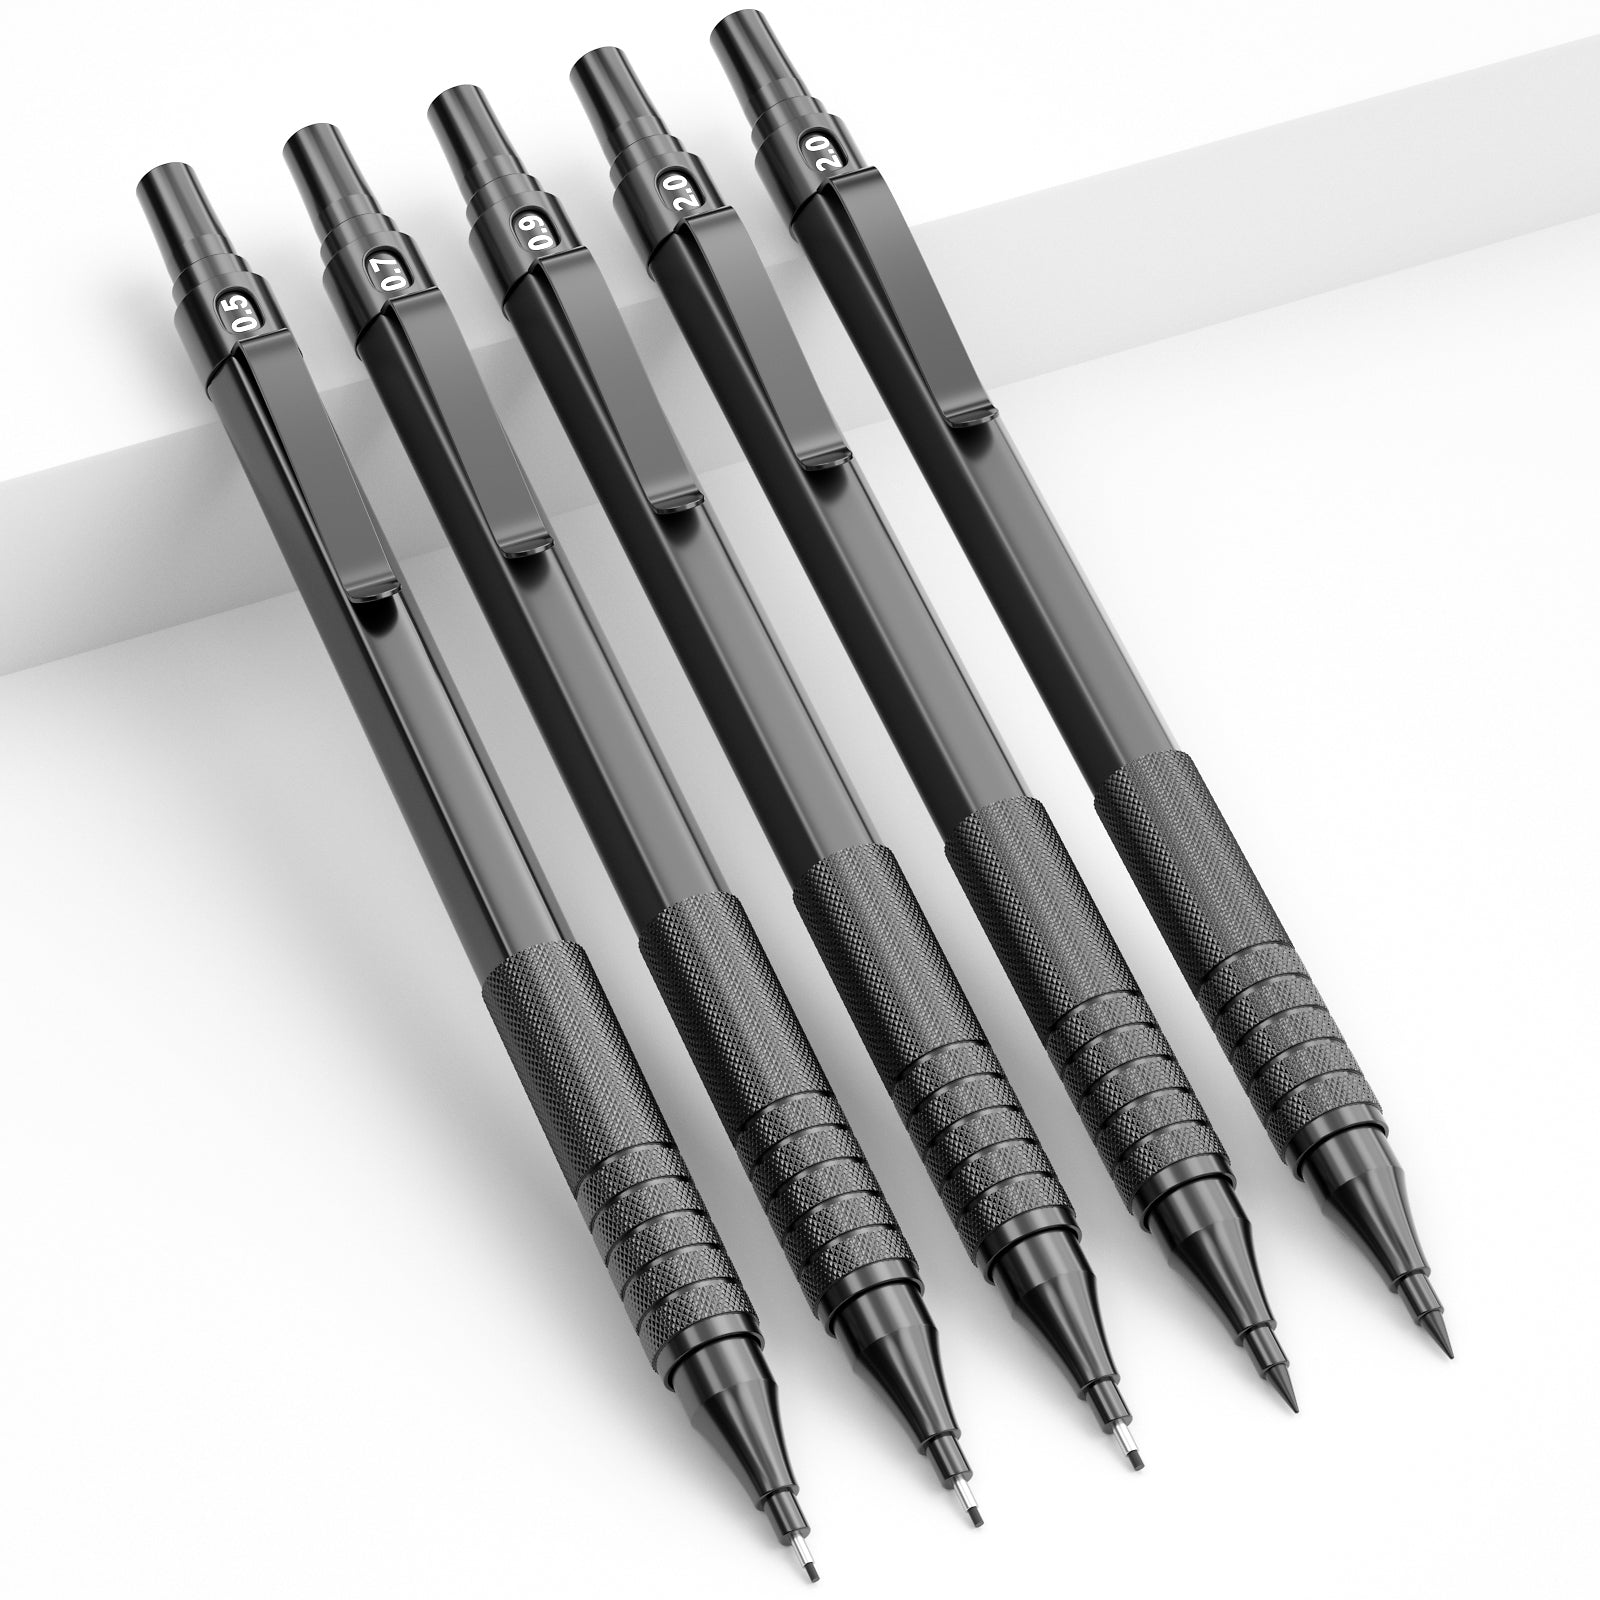 Nicpro 5PCS Metal Mechanical Pencil Set with Case, with Drafting Lead